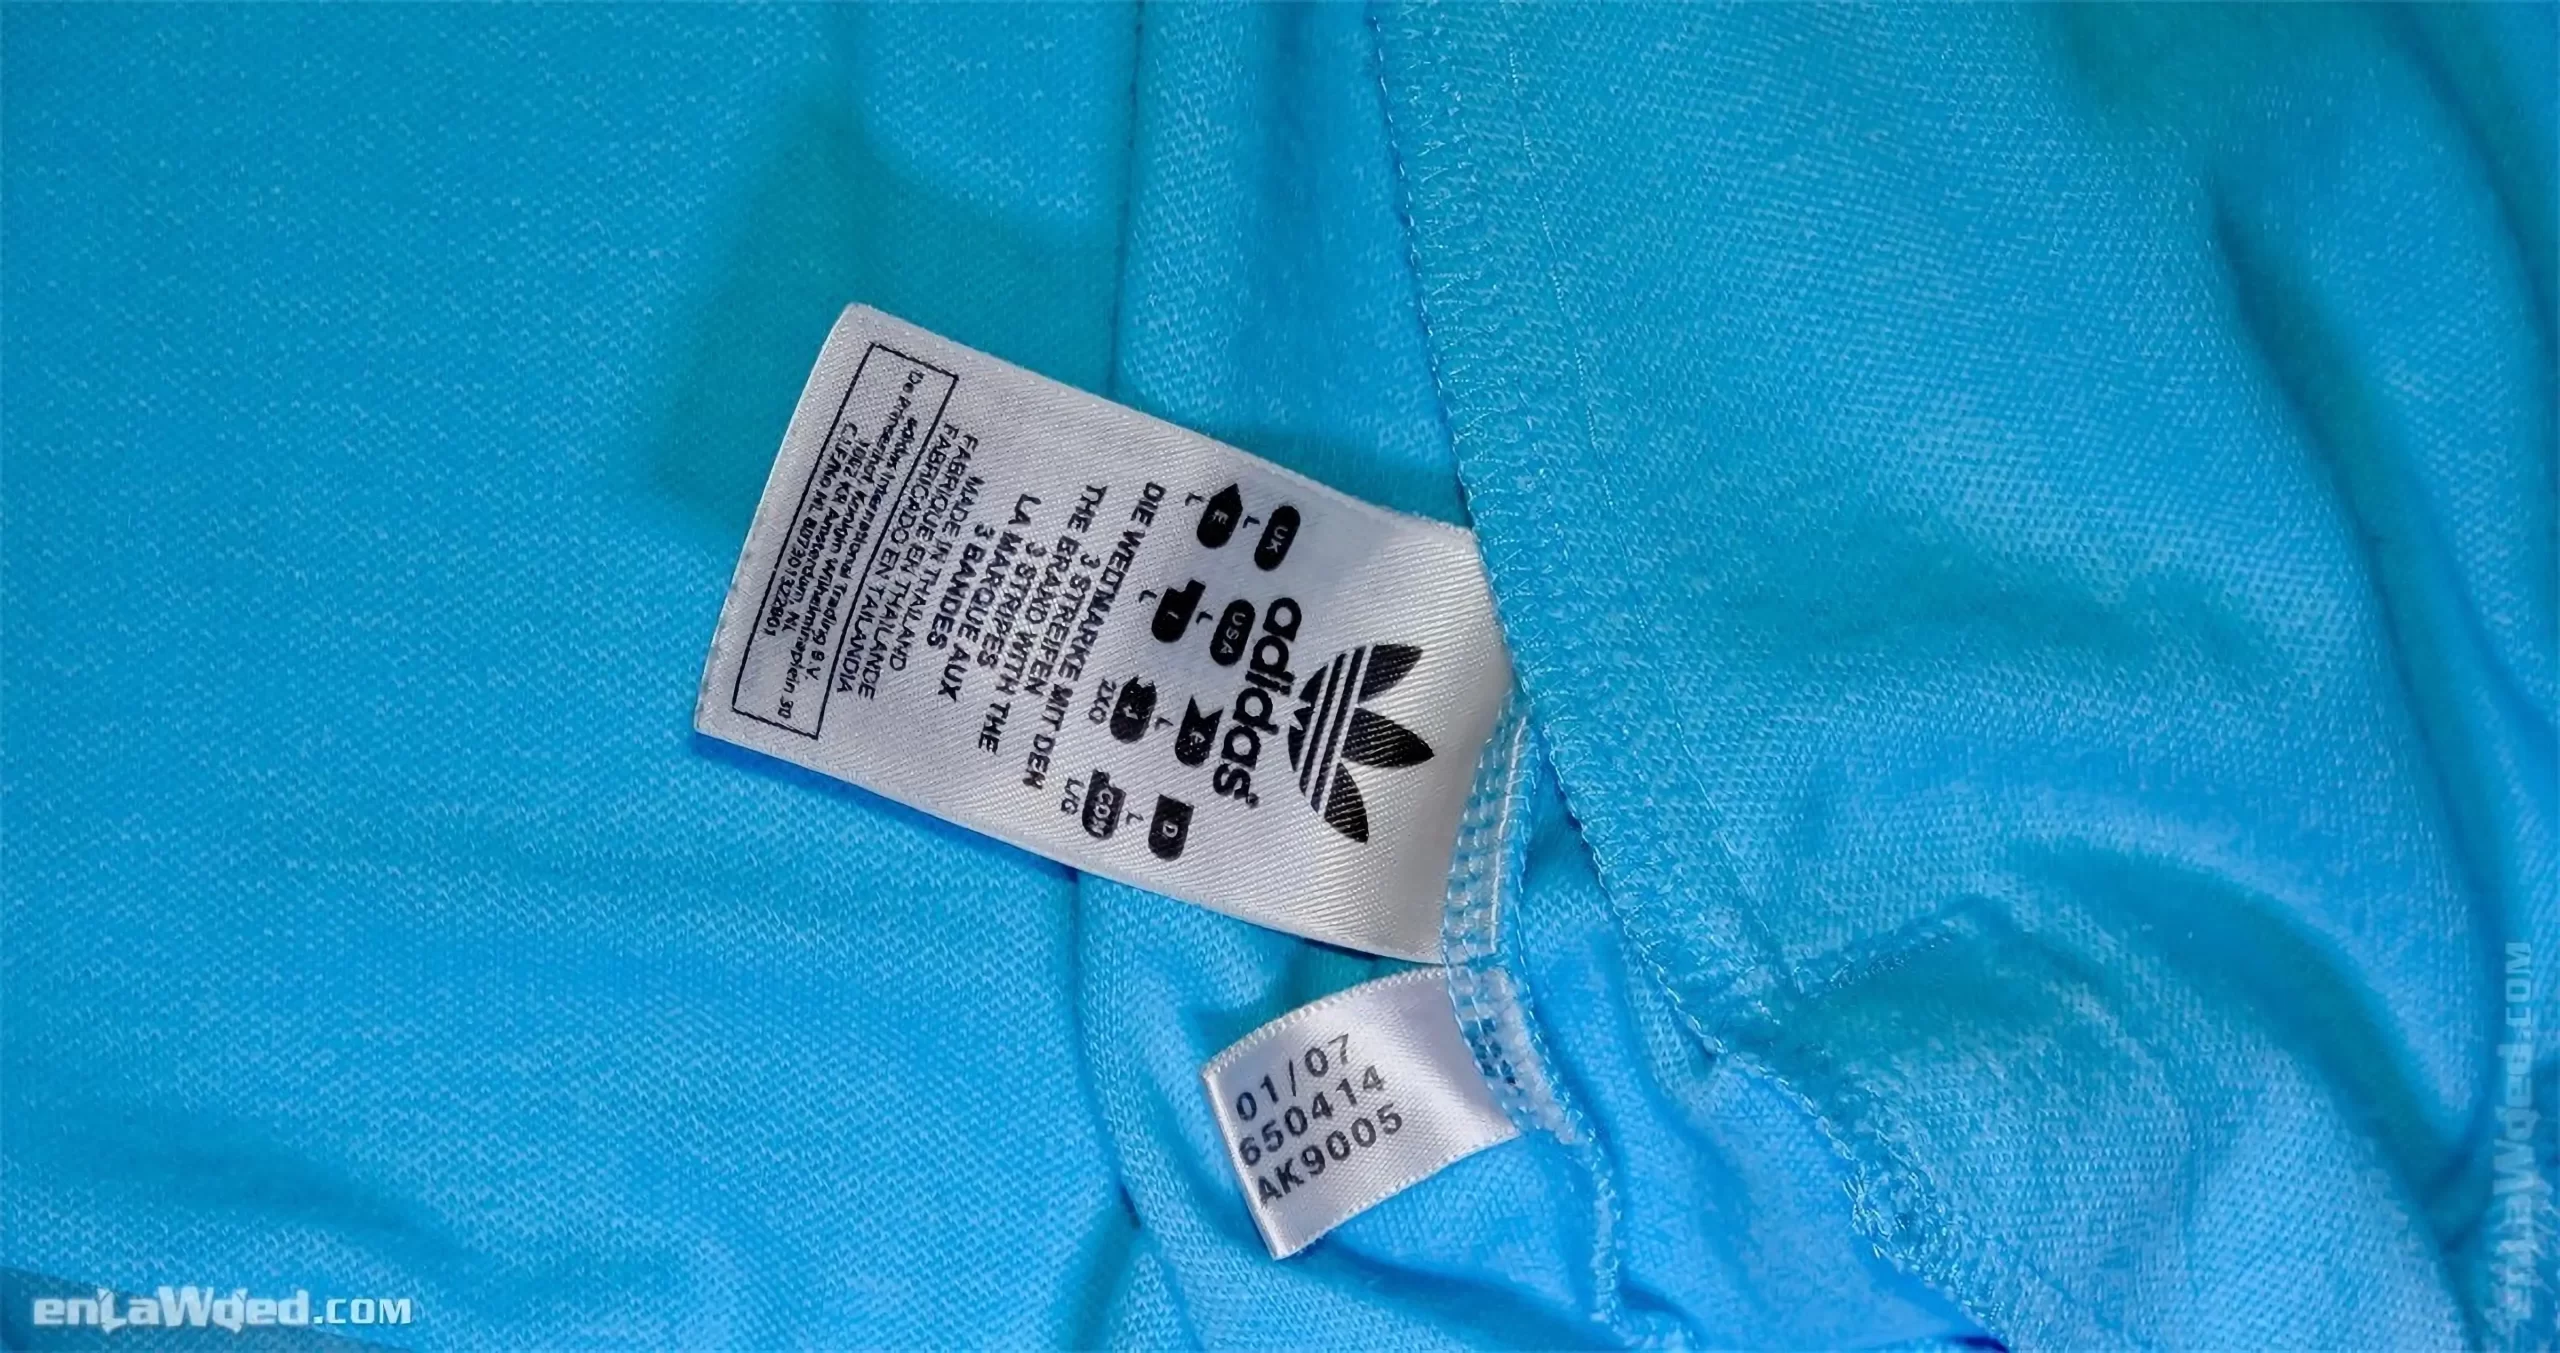 Adidas tag of the Honolulu jacket, with the month and year of fabrication: 01/2007